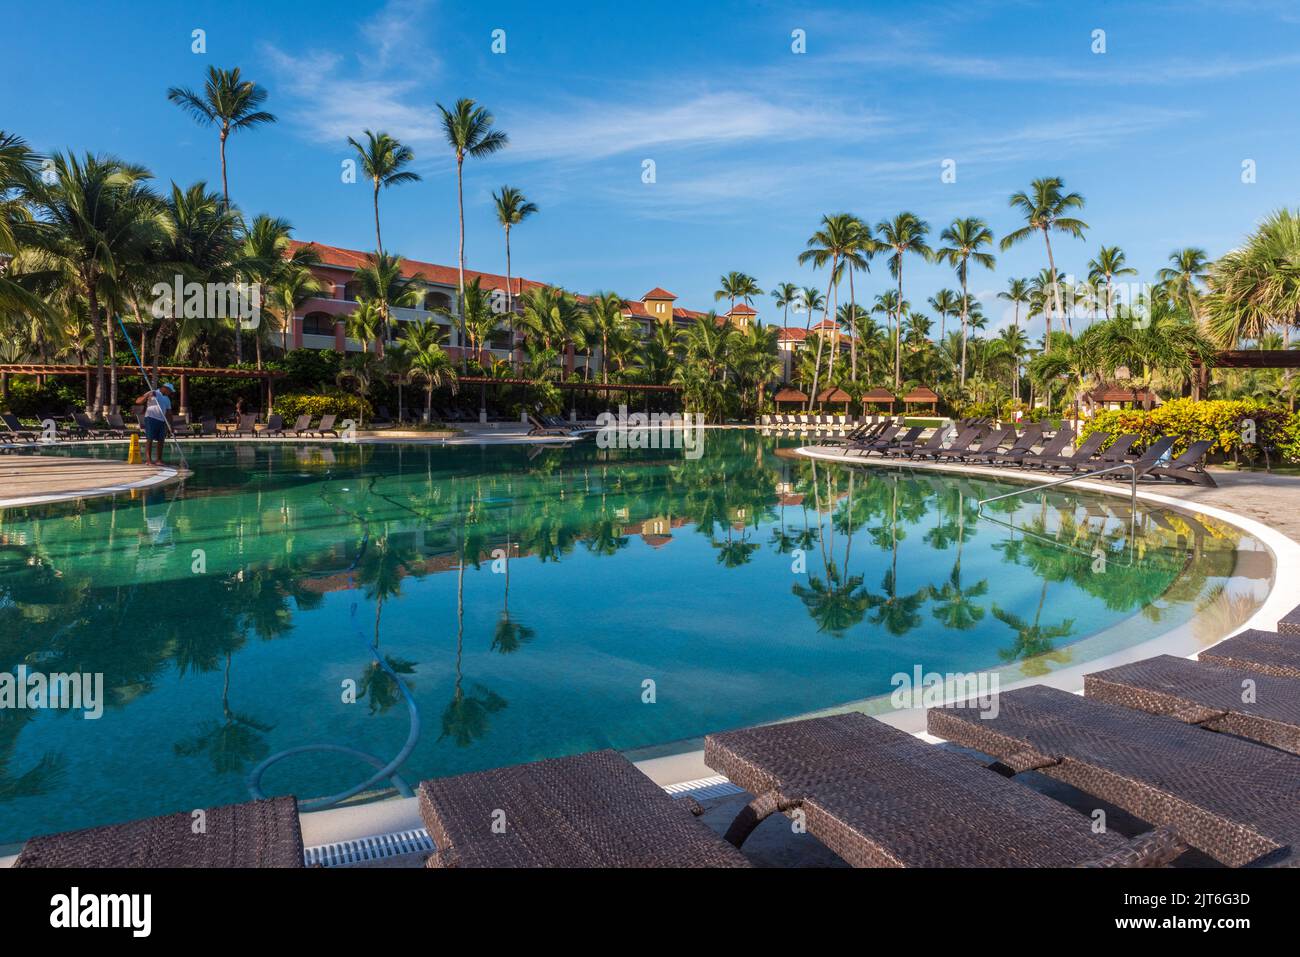 Punta Cana/ Dominican Republic - June 12 2016: Janitor cleans empty pool. Stock Photo